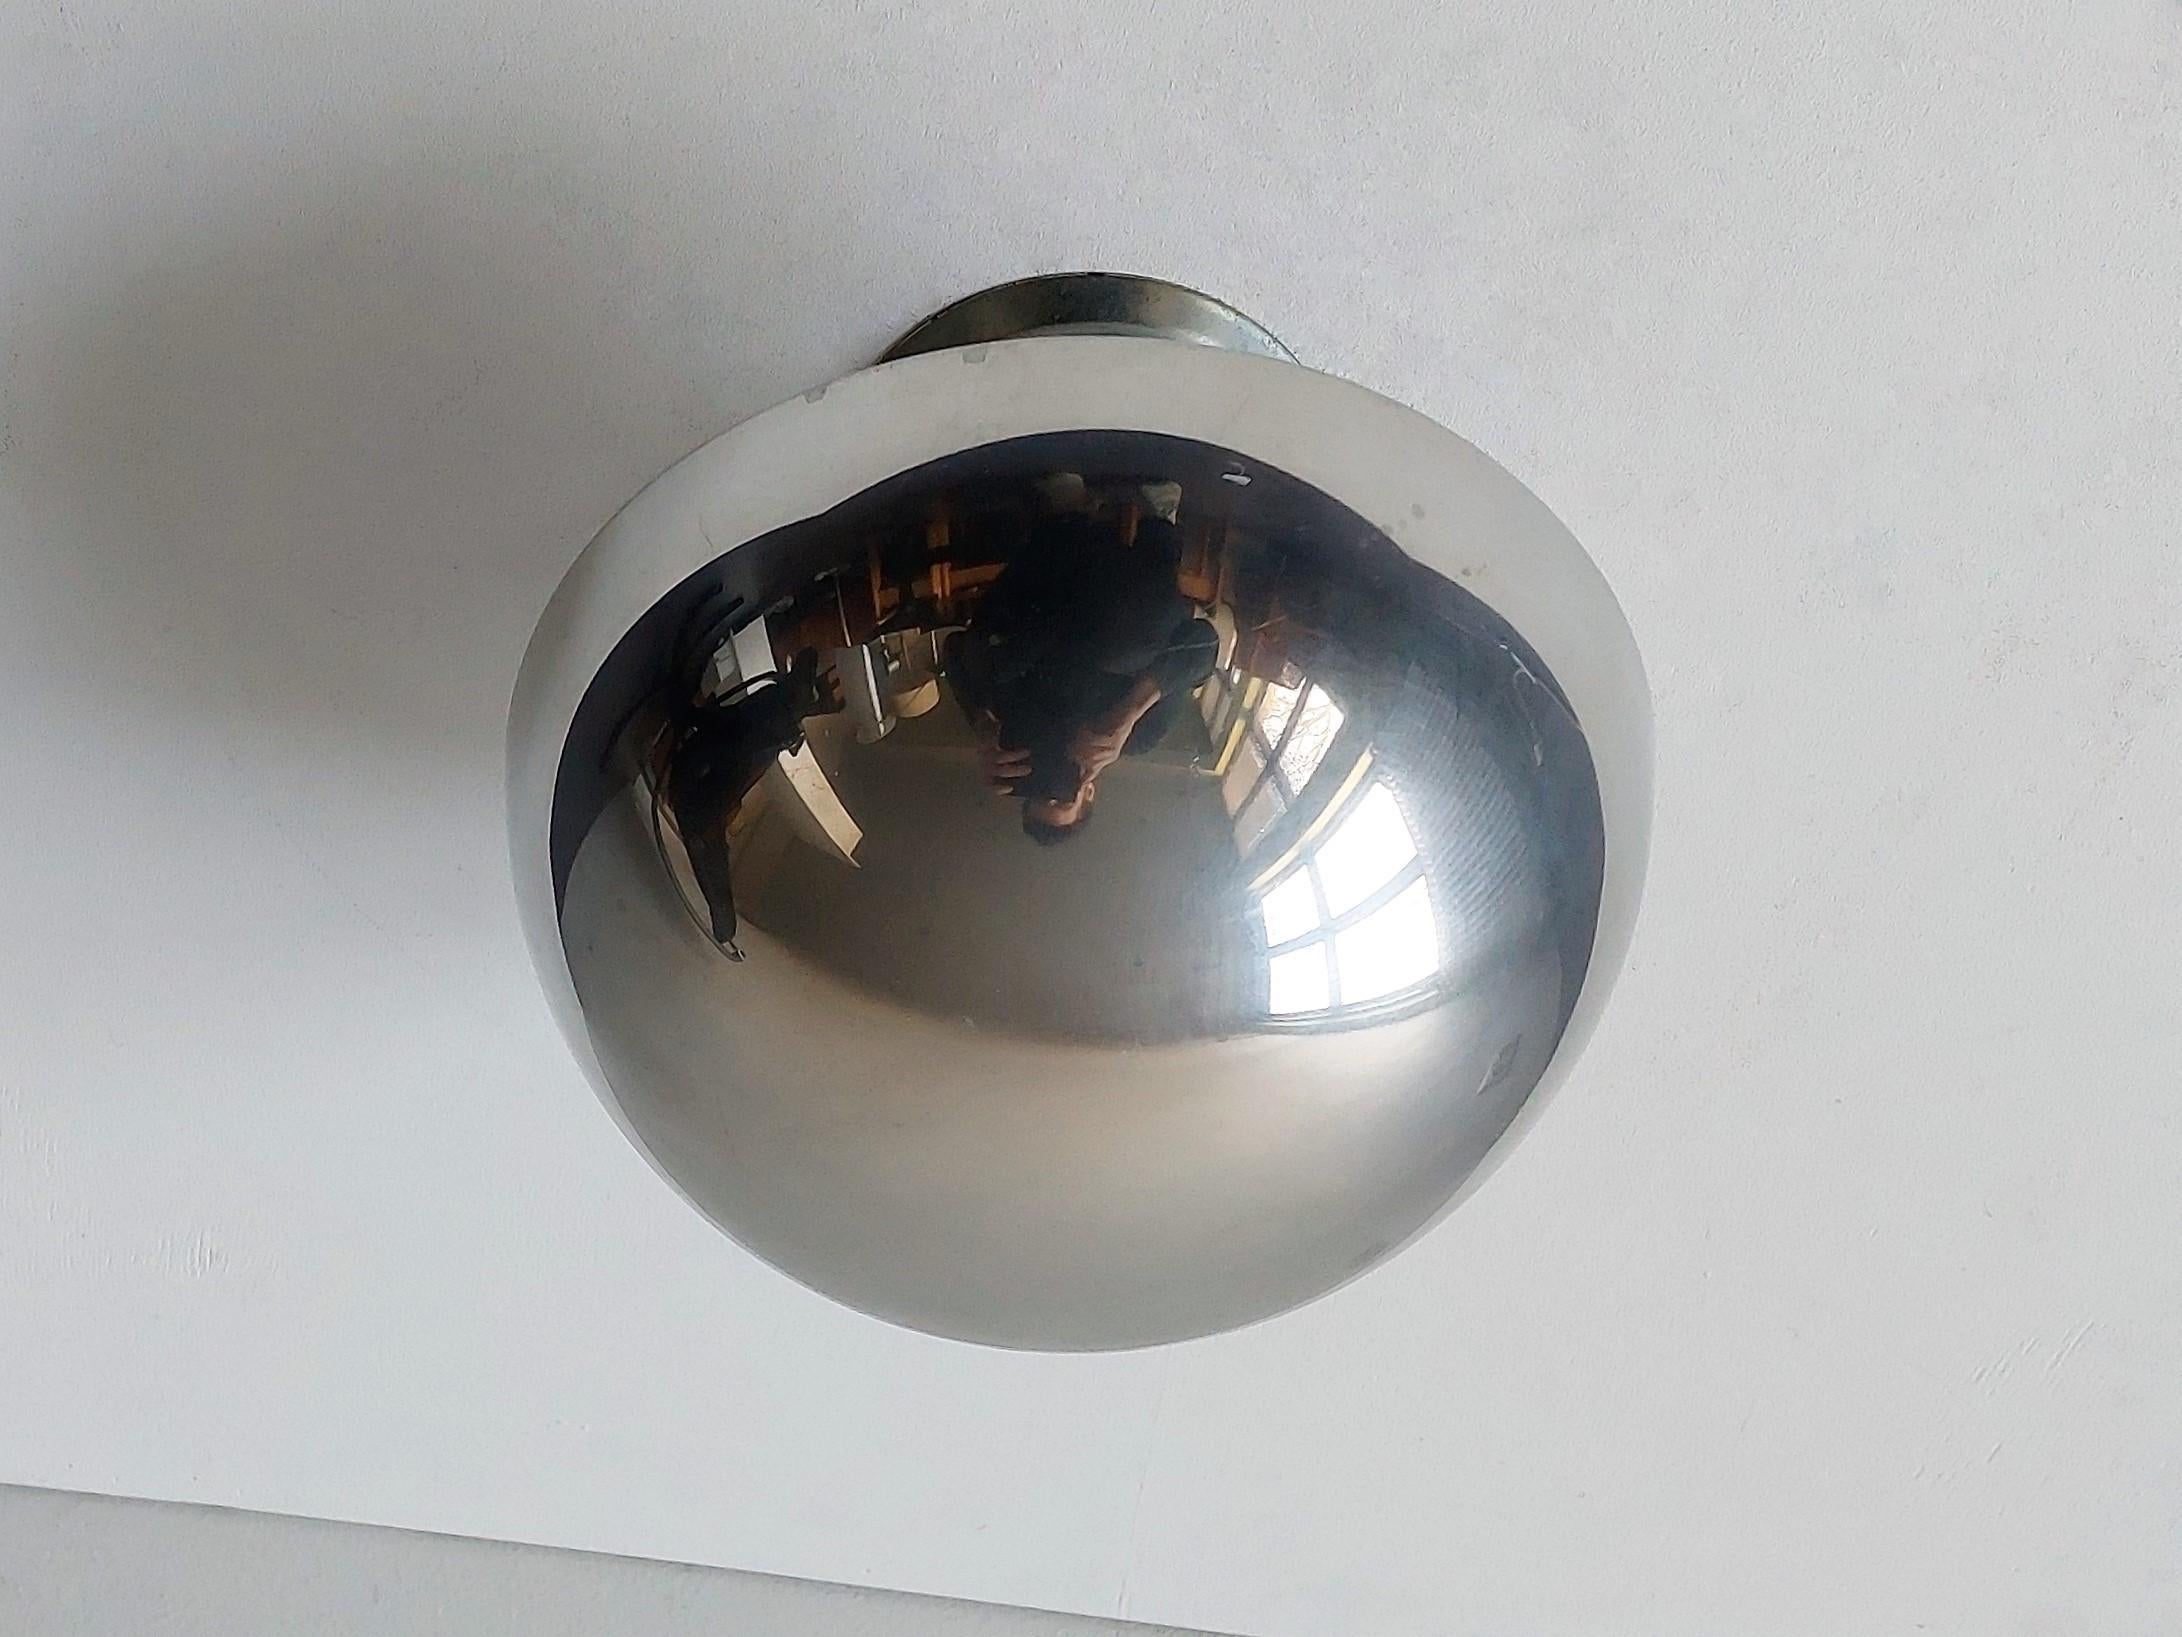 This ceiling lamp was designed by Verner Panton for Louis Poulsen in the 1960's. It is clearly part of the 'Flowerpot familiy'. It is a playful piece with a mirrored chrome outside and a soft pink inside that gives a very decorative and warm